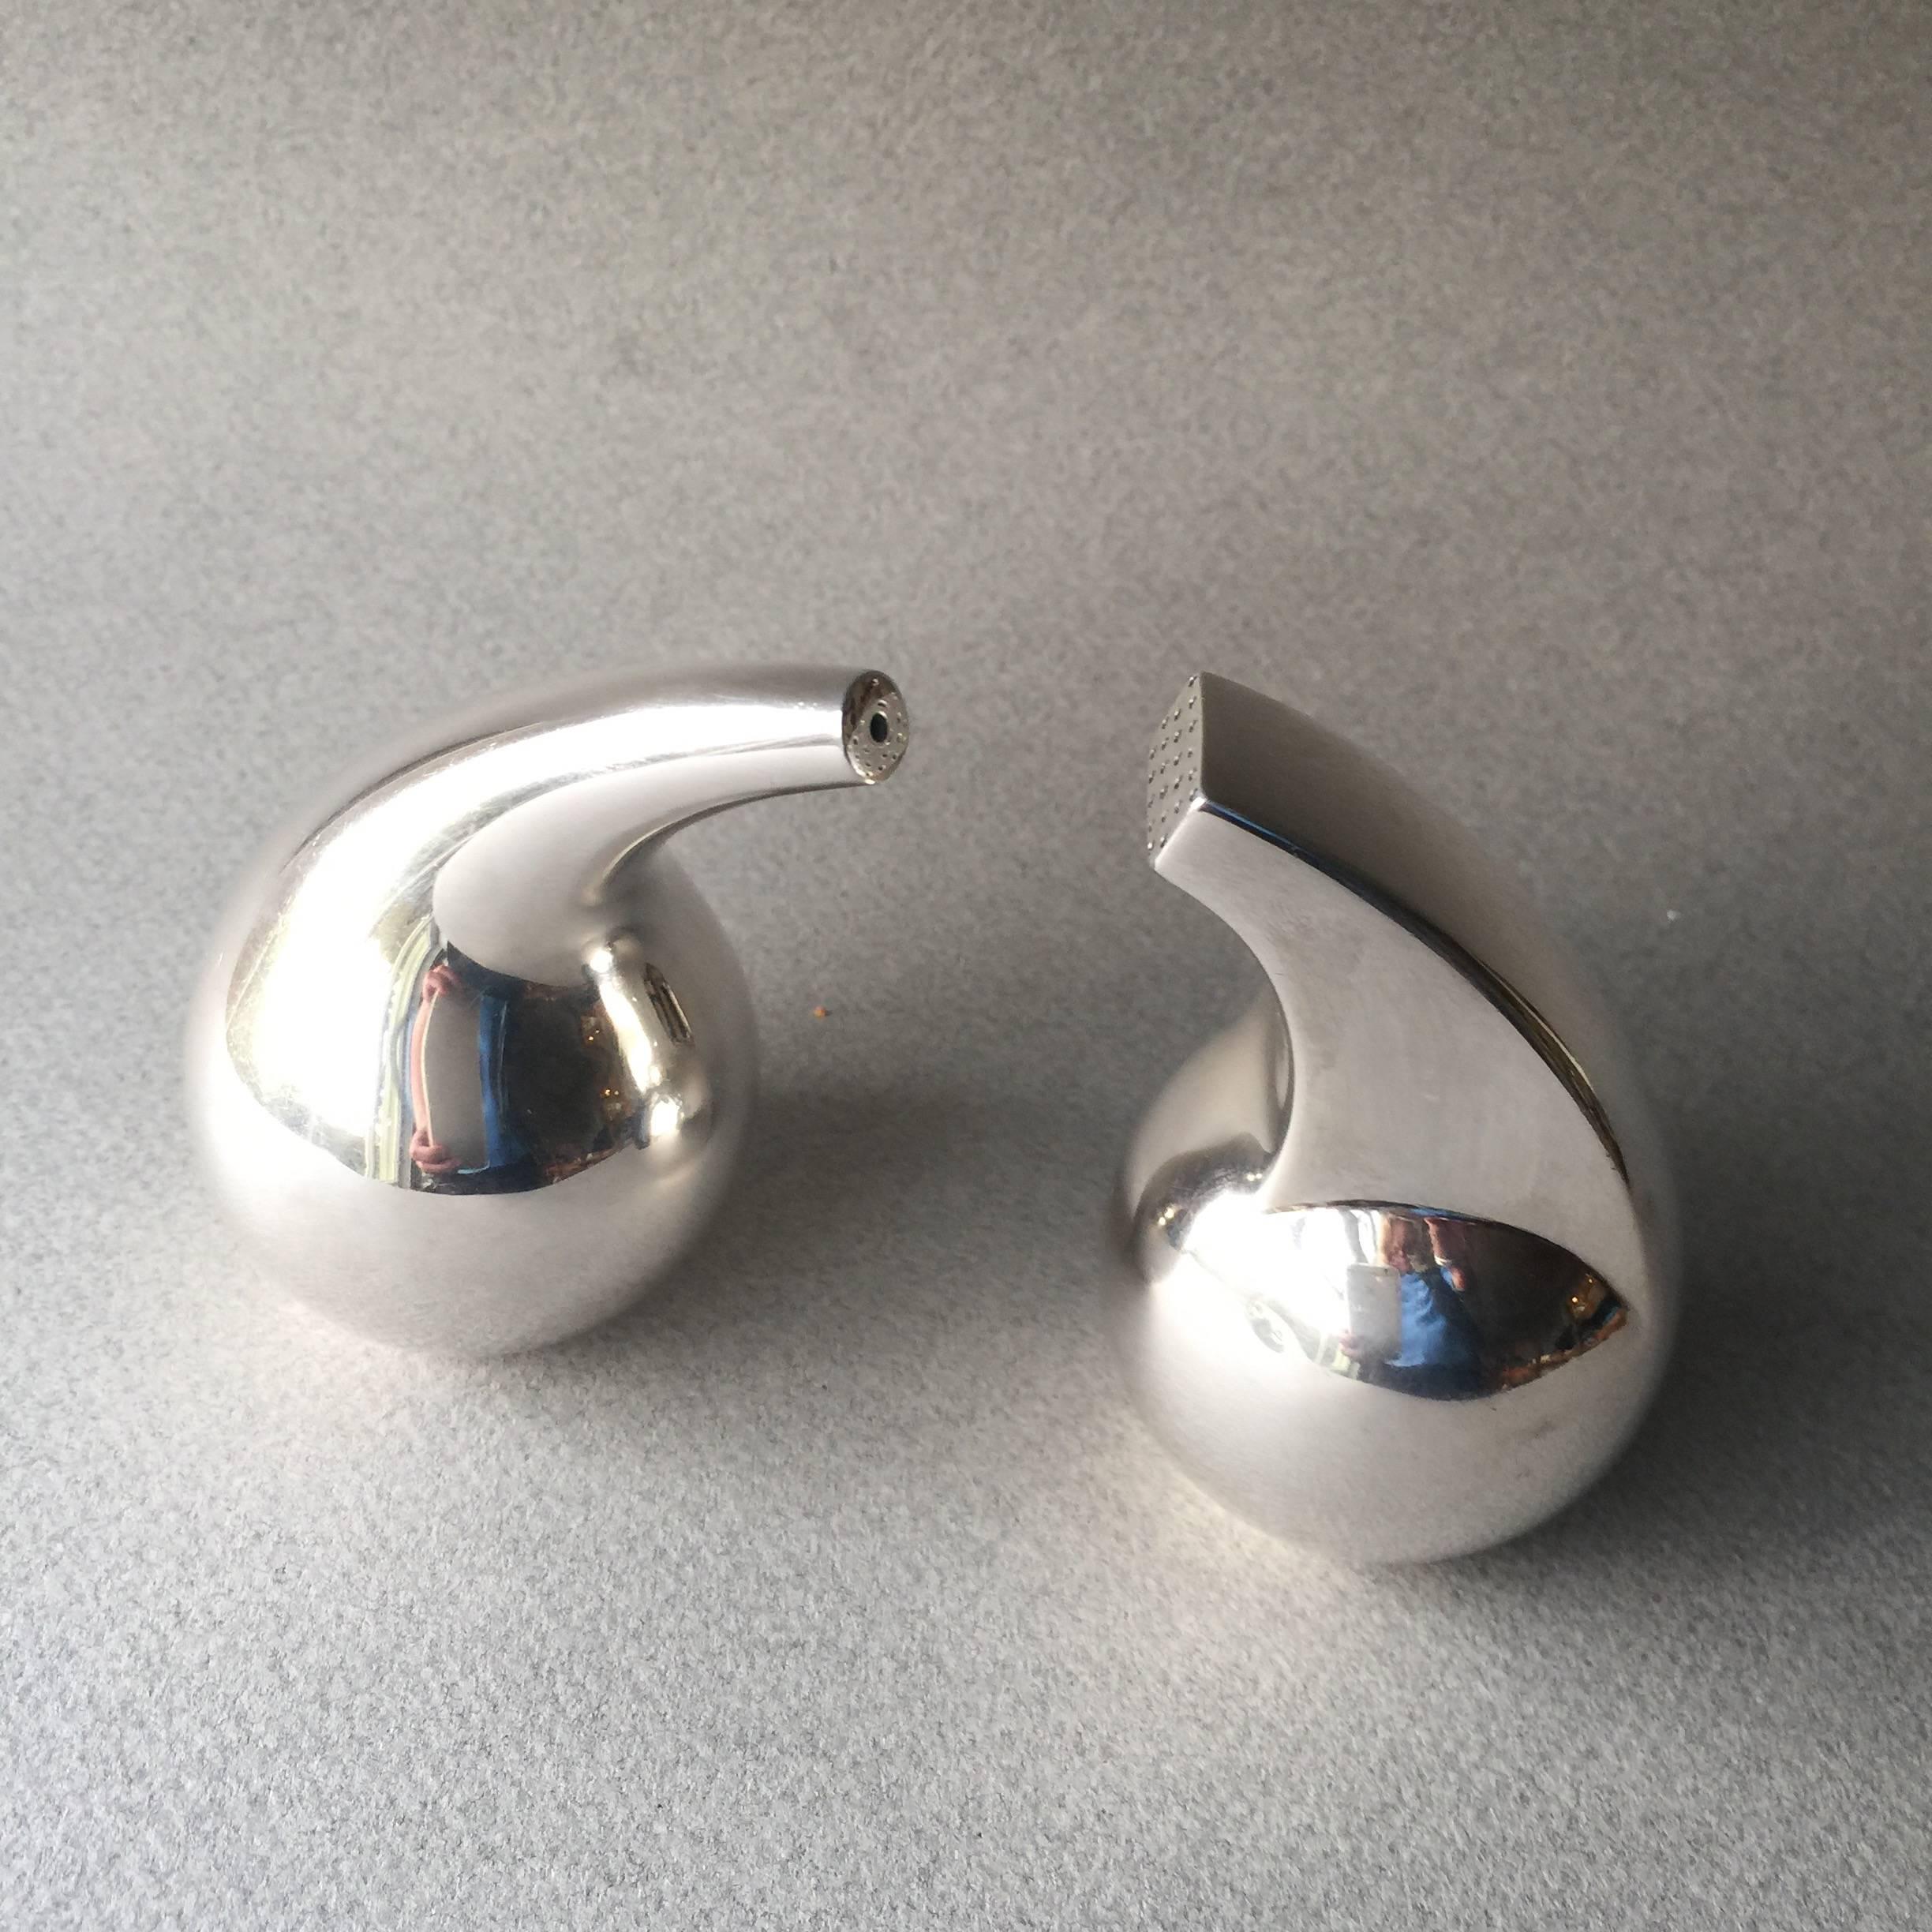 Sterling Silver Salt and Pepper No. 965 by Soren Georg Jensen.

Extremely modern designed in 1949.  Very modern pair for the era. 

A similar example can be seen in the book GEORG JENSEN HOLLOWARE, The Silver Fund Collection by David Taylor and